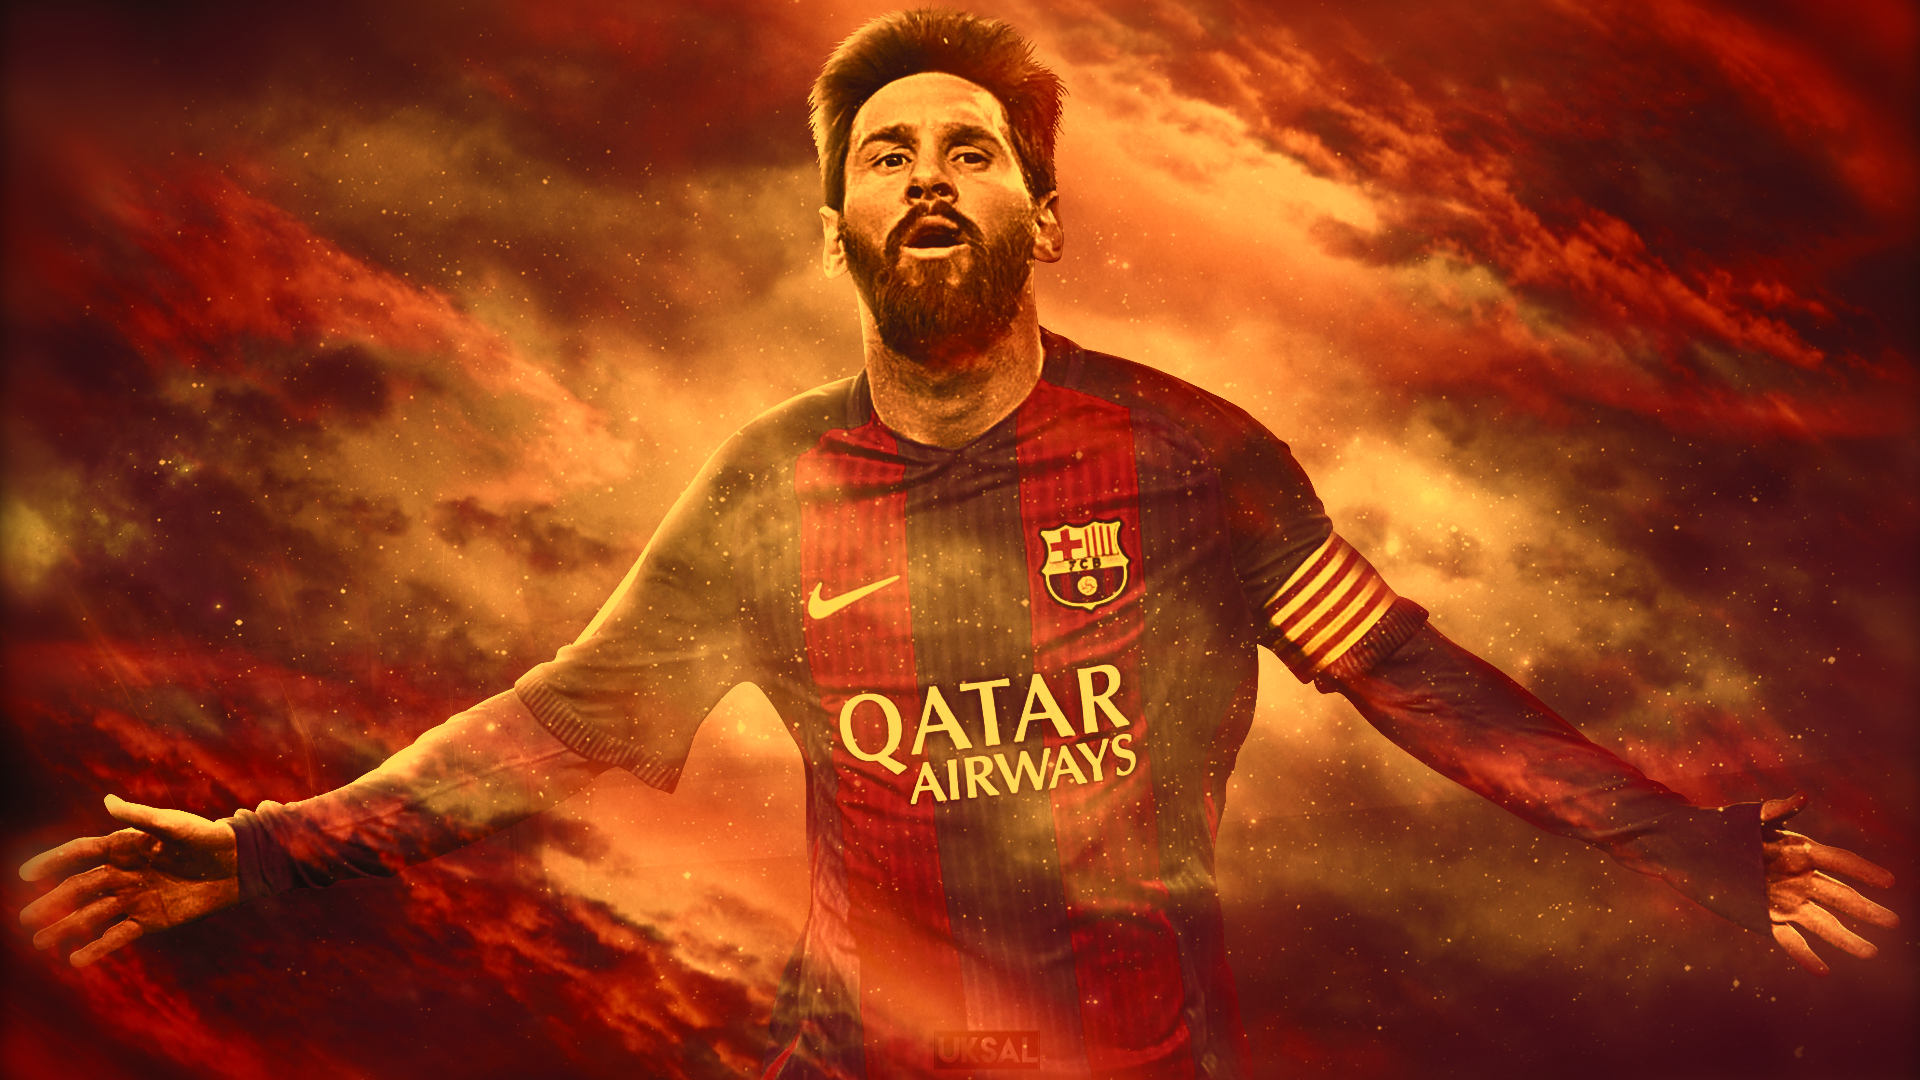 messi hd wallpapers 2017,football player,soccer player,geological phenomenon,graphics,player